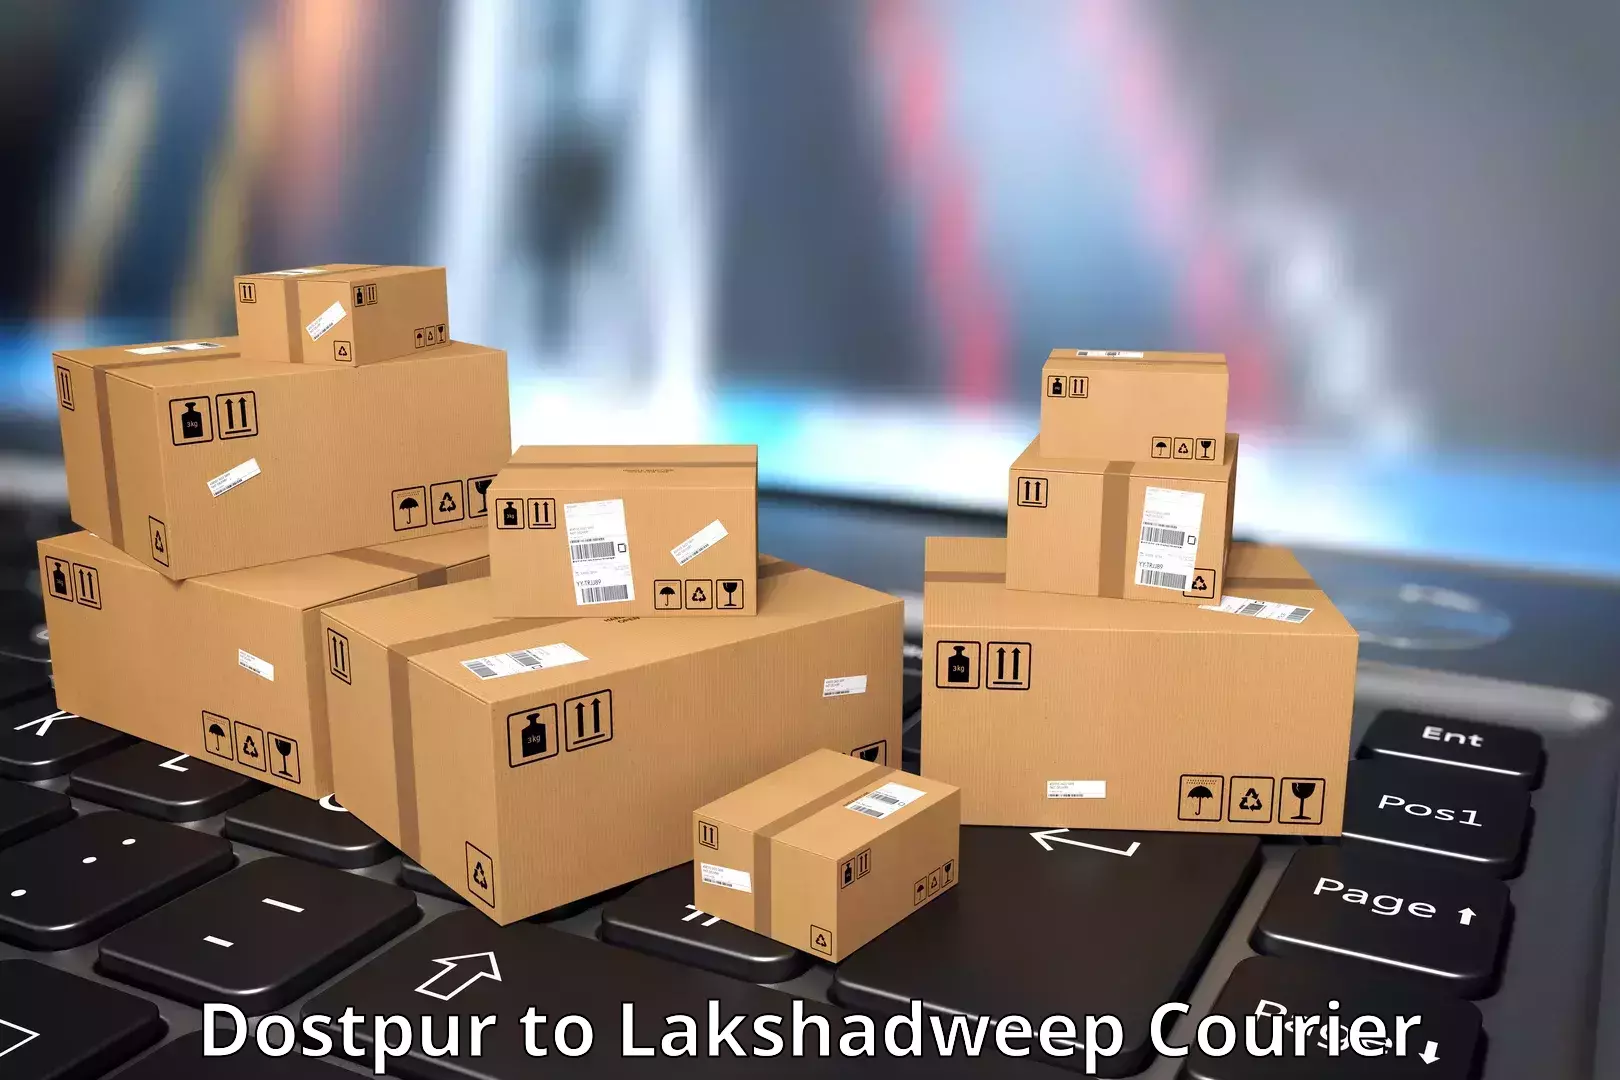 24-hour courier service Dostpur to Lakshadweep